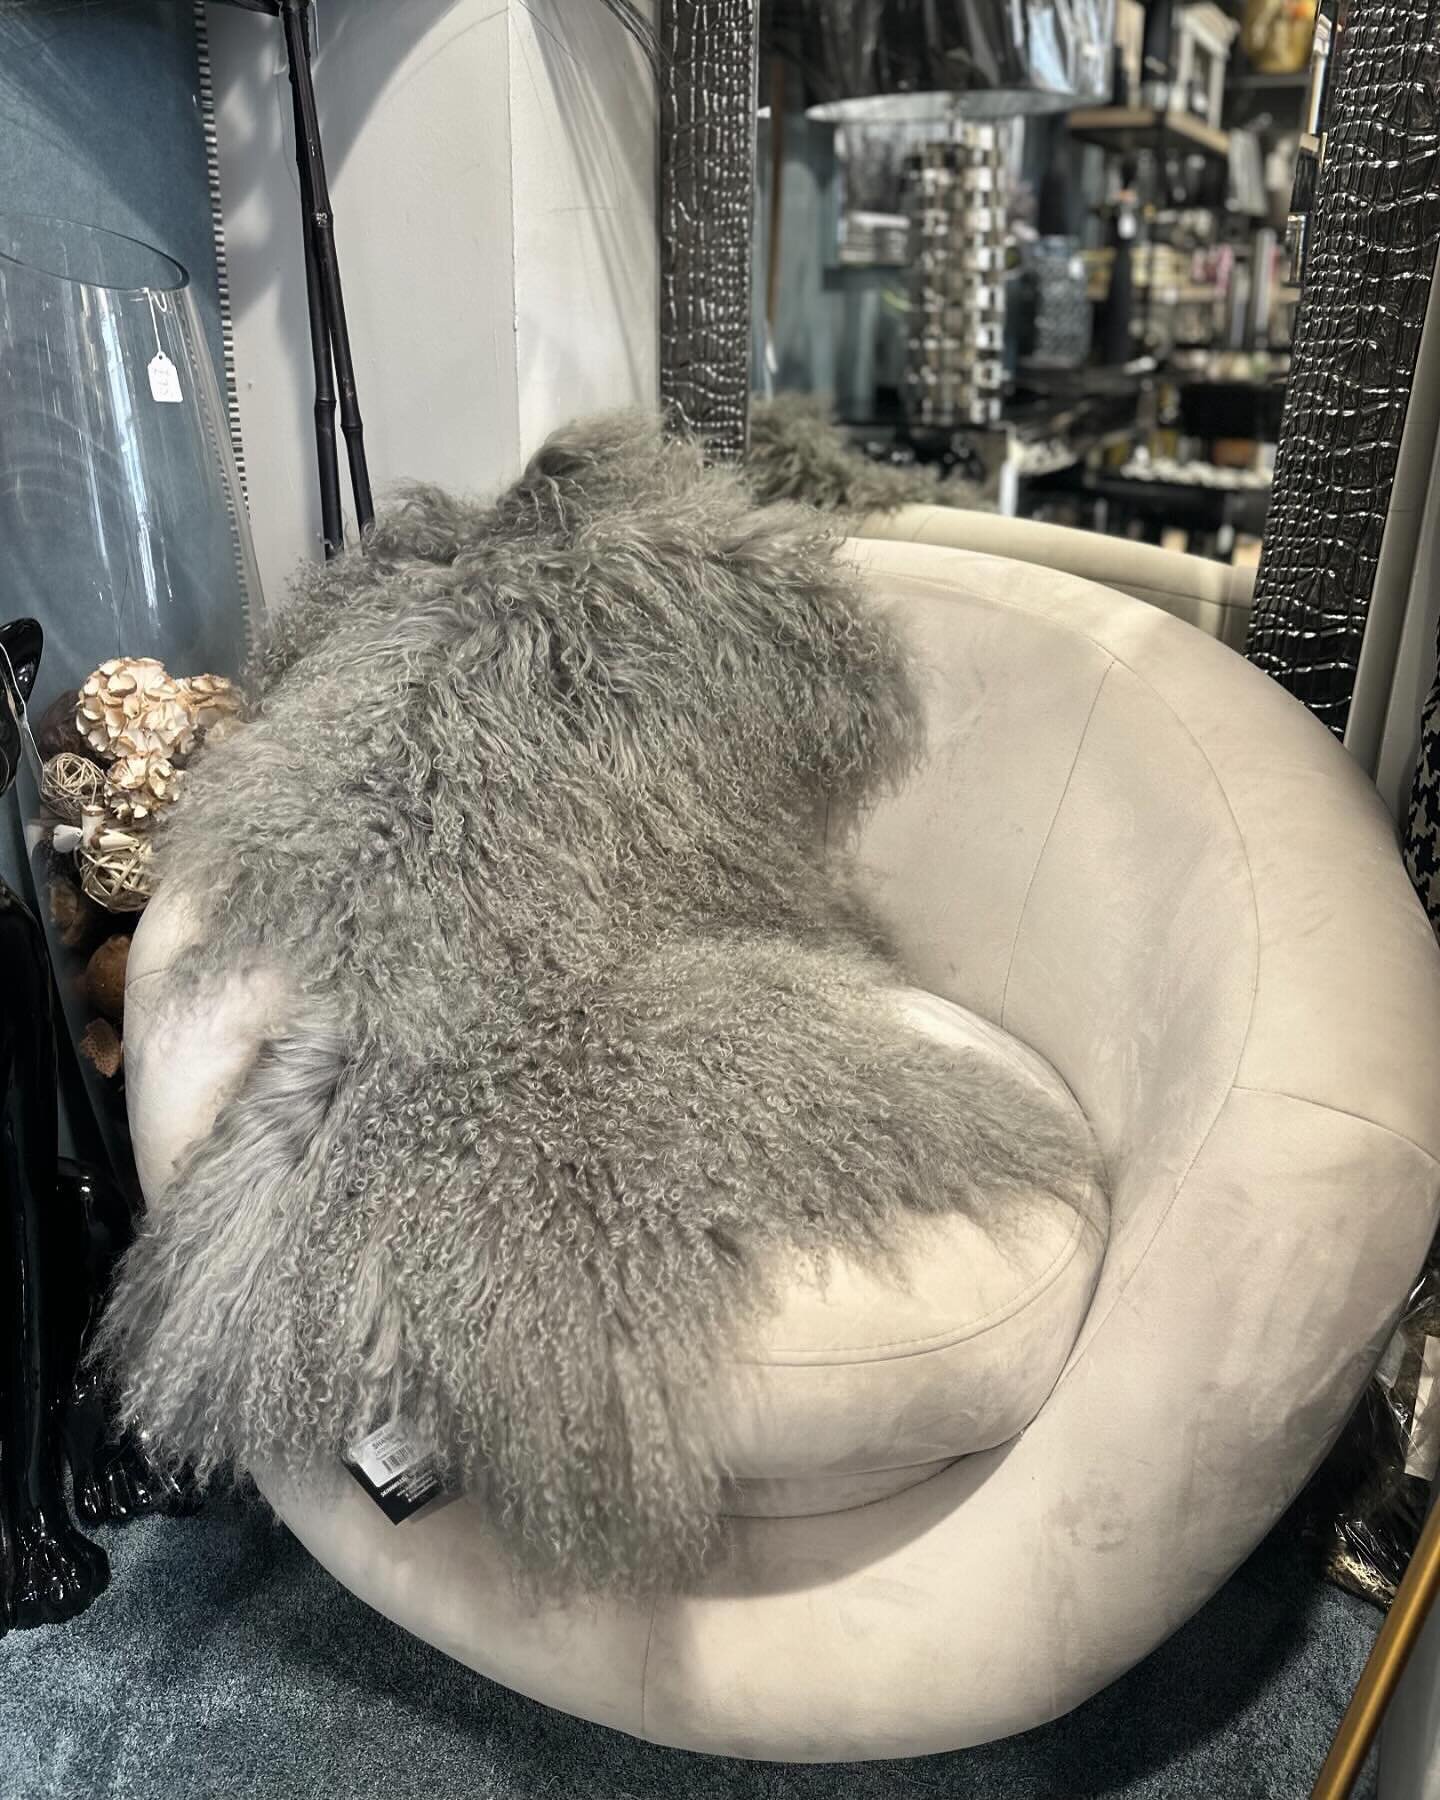 NEW COLLECTION!

We have taken delivery this week of these luxury Shanxi Tibetlamb Sheepskin rugs and cushions! 🐑🤍

Rugs - &pound;95.00
Cushions with interiors &pound;59.00

Super soft and available in colours: grey, mushroom, taupe, snow and honey